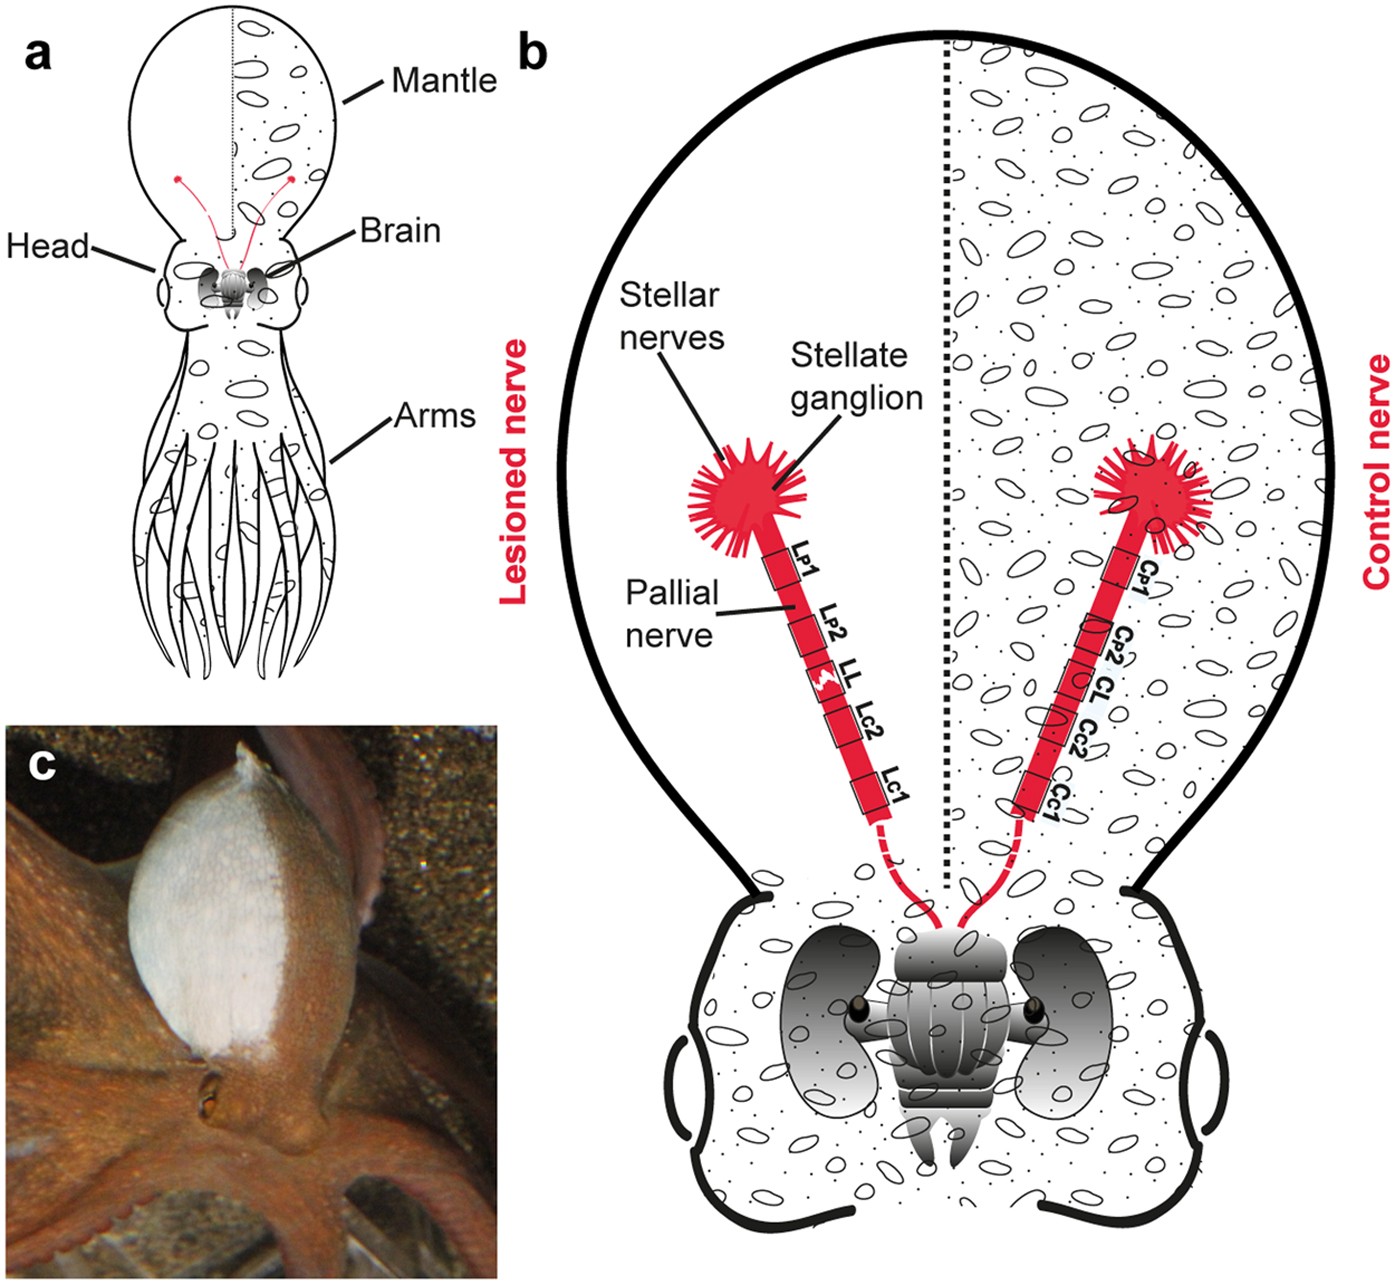 Nerve degeneration and regeneration in the cephalopod mollusc Octopus  vulgaris: the case of the pallial nerve | Scientific Reports